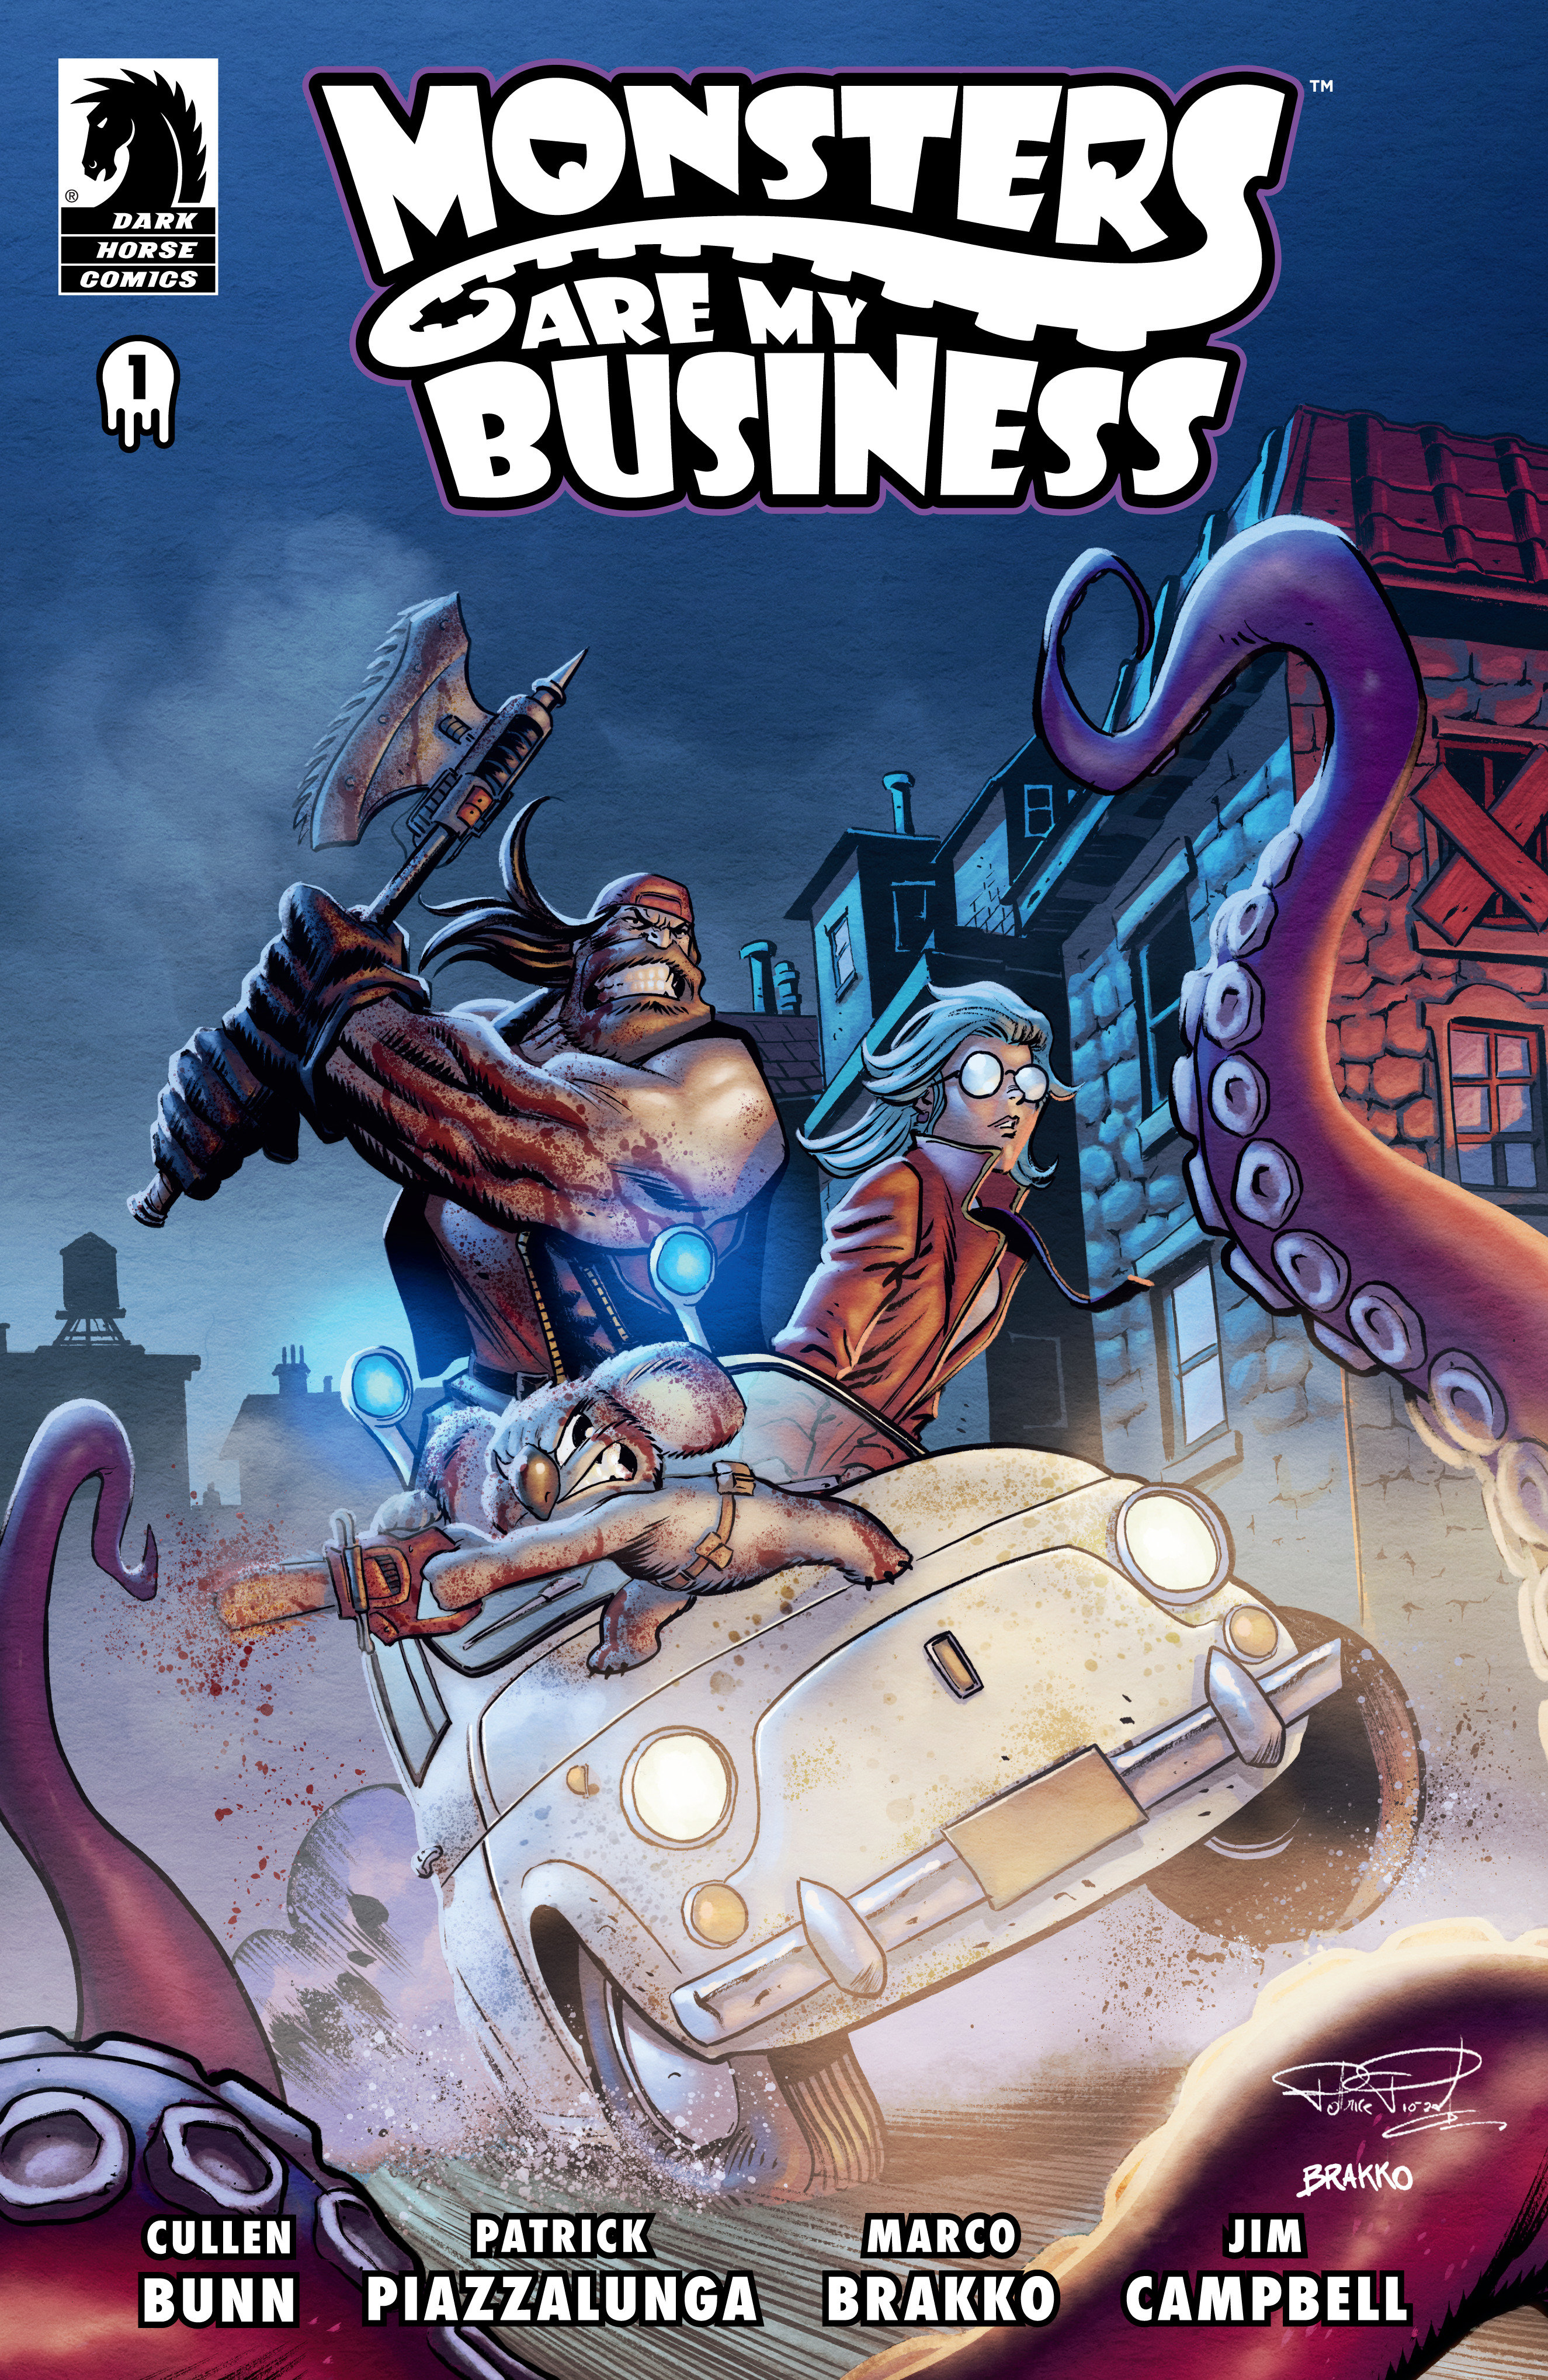 Monsters are My Business & Business is Bloody #1 Cover A (Patrick Piazzalunga)